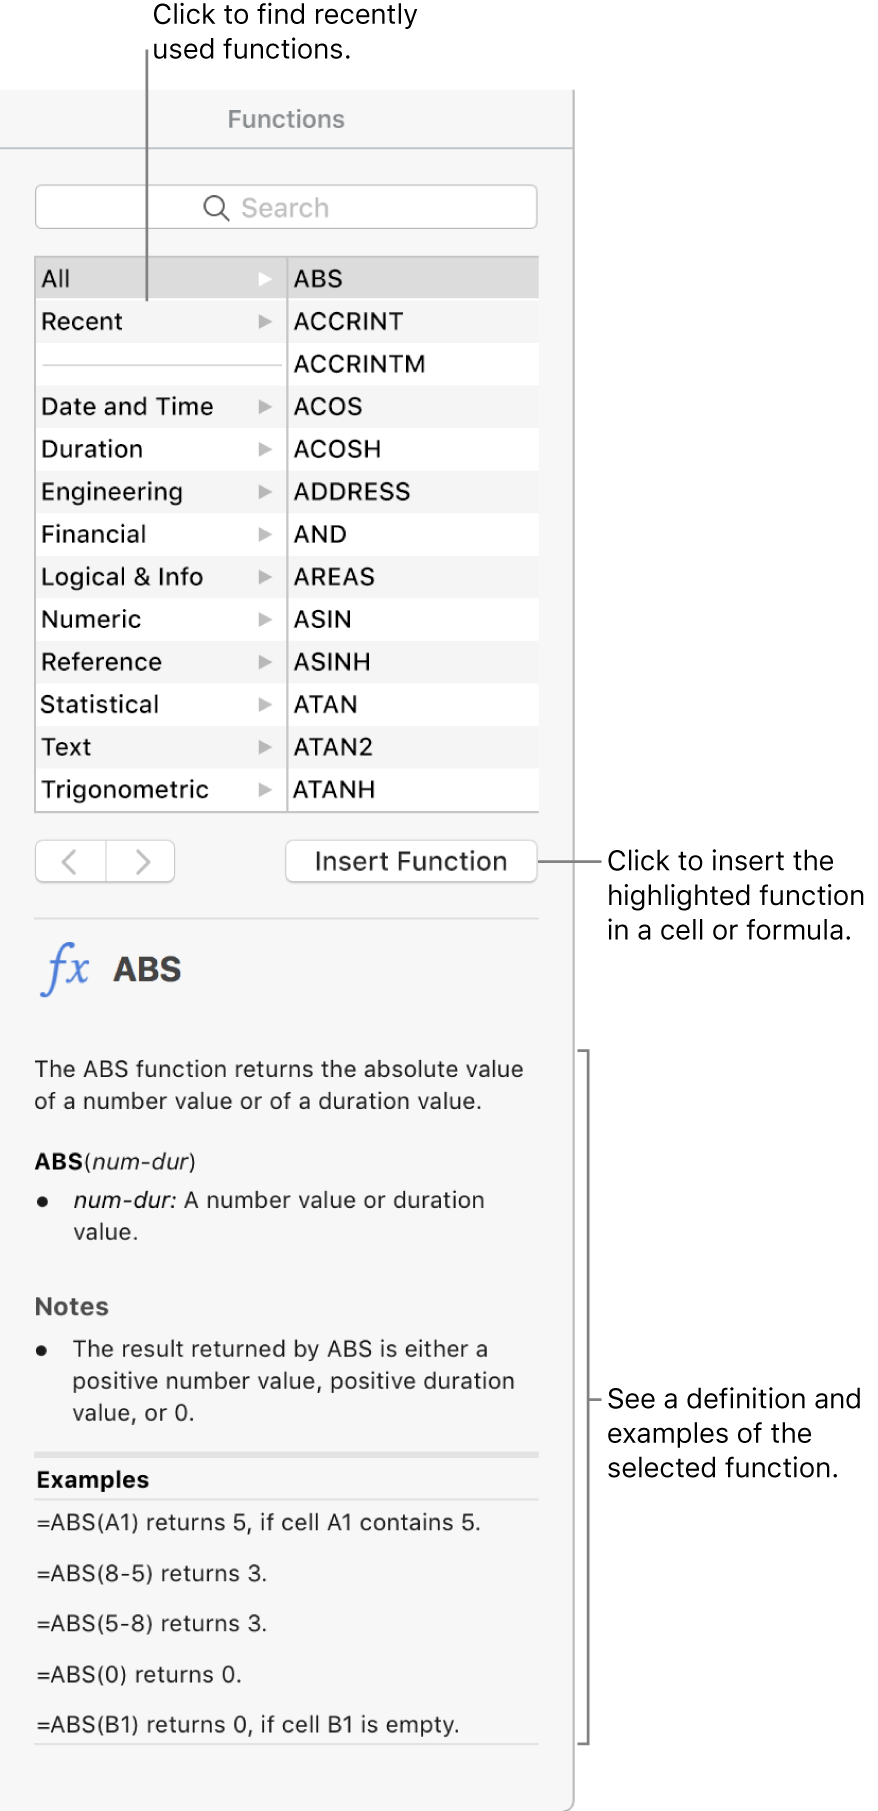 The Functions Browser with callouts to recently used functions, the Insert Function button and the function definition.